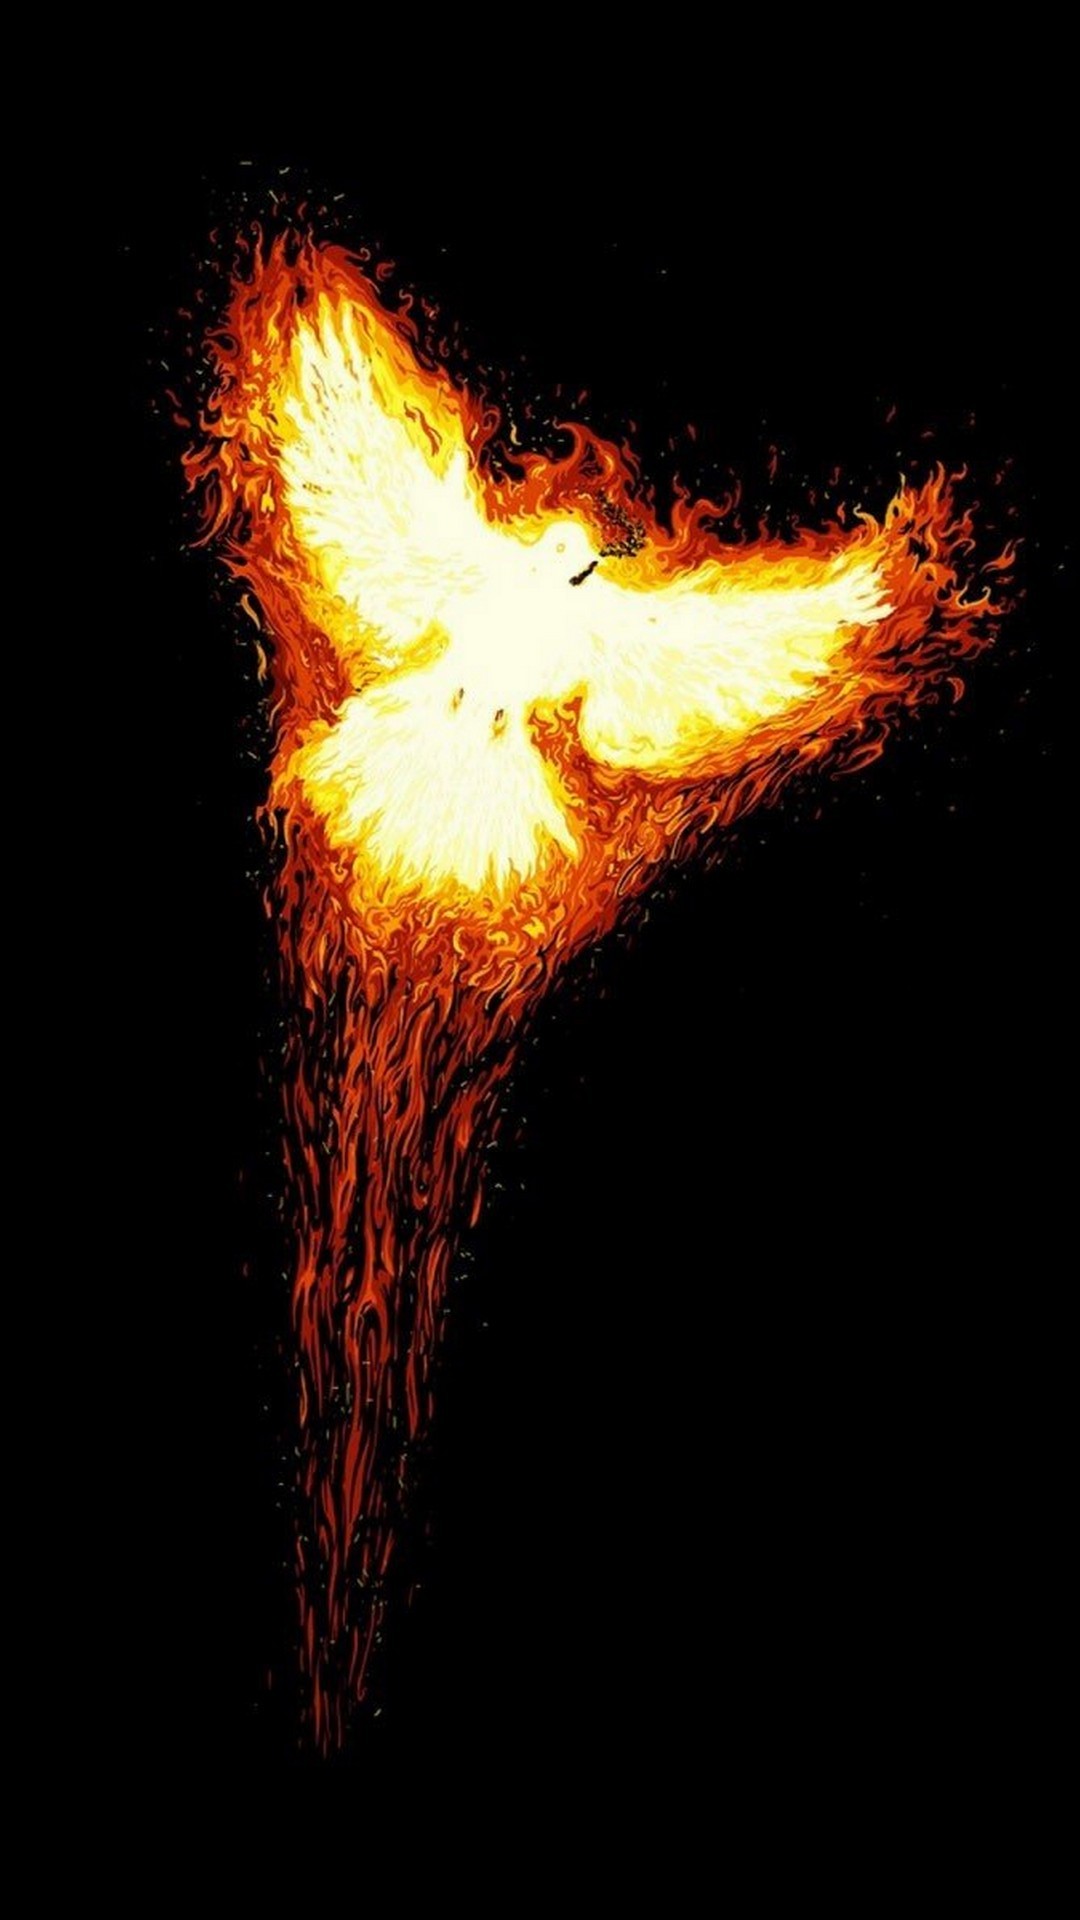 iPhone 7 Wallpaper Phoenix with image resolution 1080x1920 pixel. You can make this wallpaper for your iPhone 5, 6, 7, 8, X backgrounds, Mobile Screensaver, or iPad Lock Screen